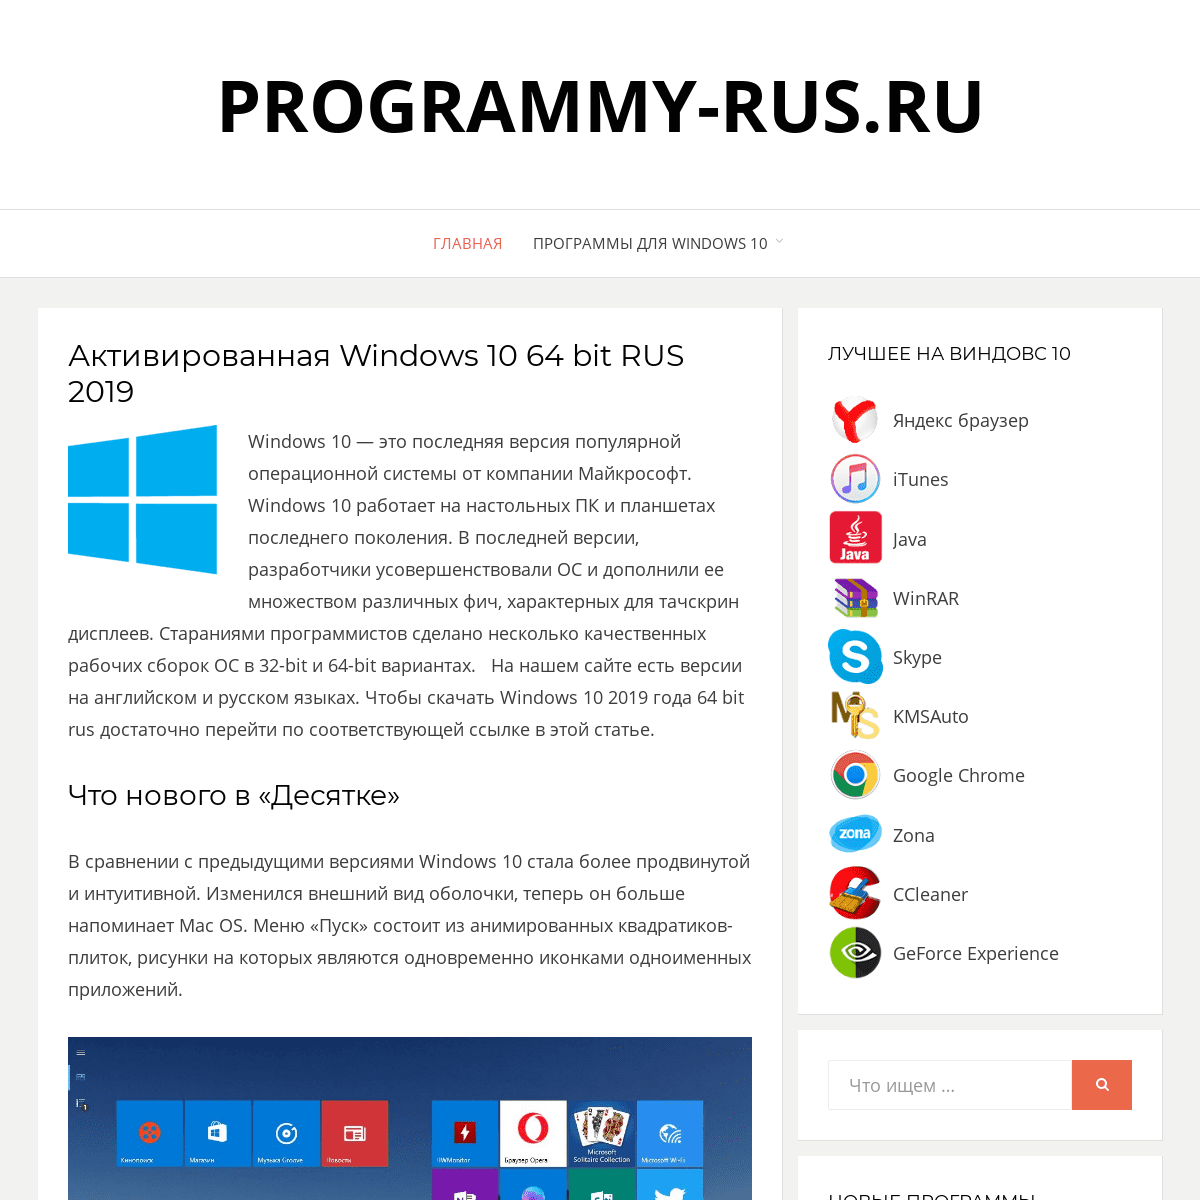 A complete backup of programmy-rus.ru